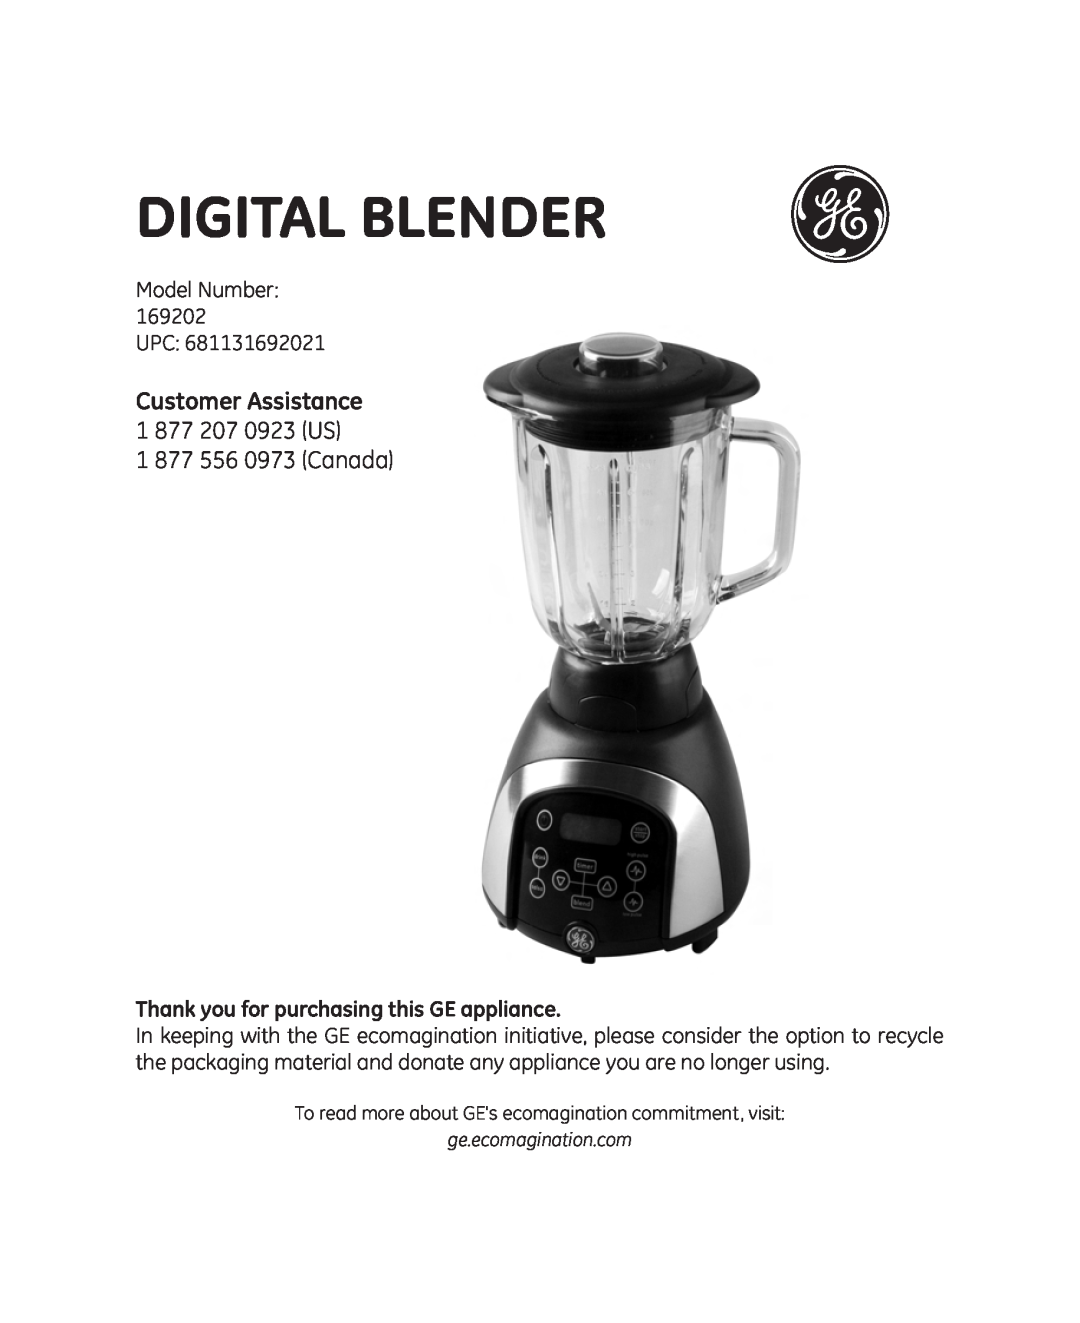 GE 169202 manual Customer Assistance 1 877 207 0923 US, Thank you for purchasing this GE appliance, DIGITAL Blender 